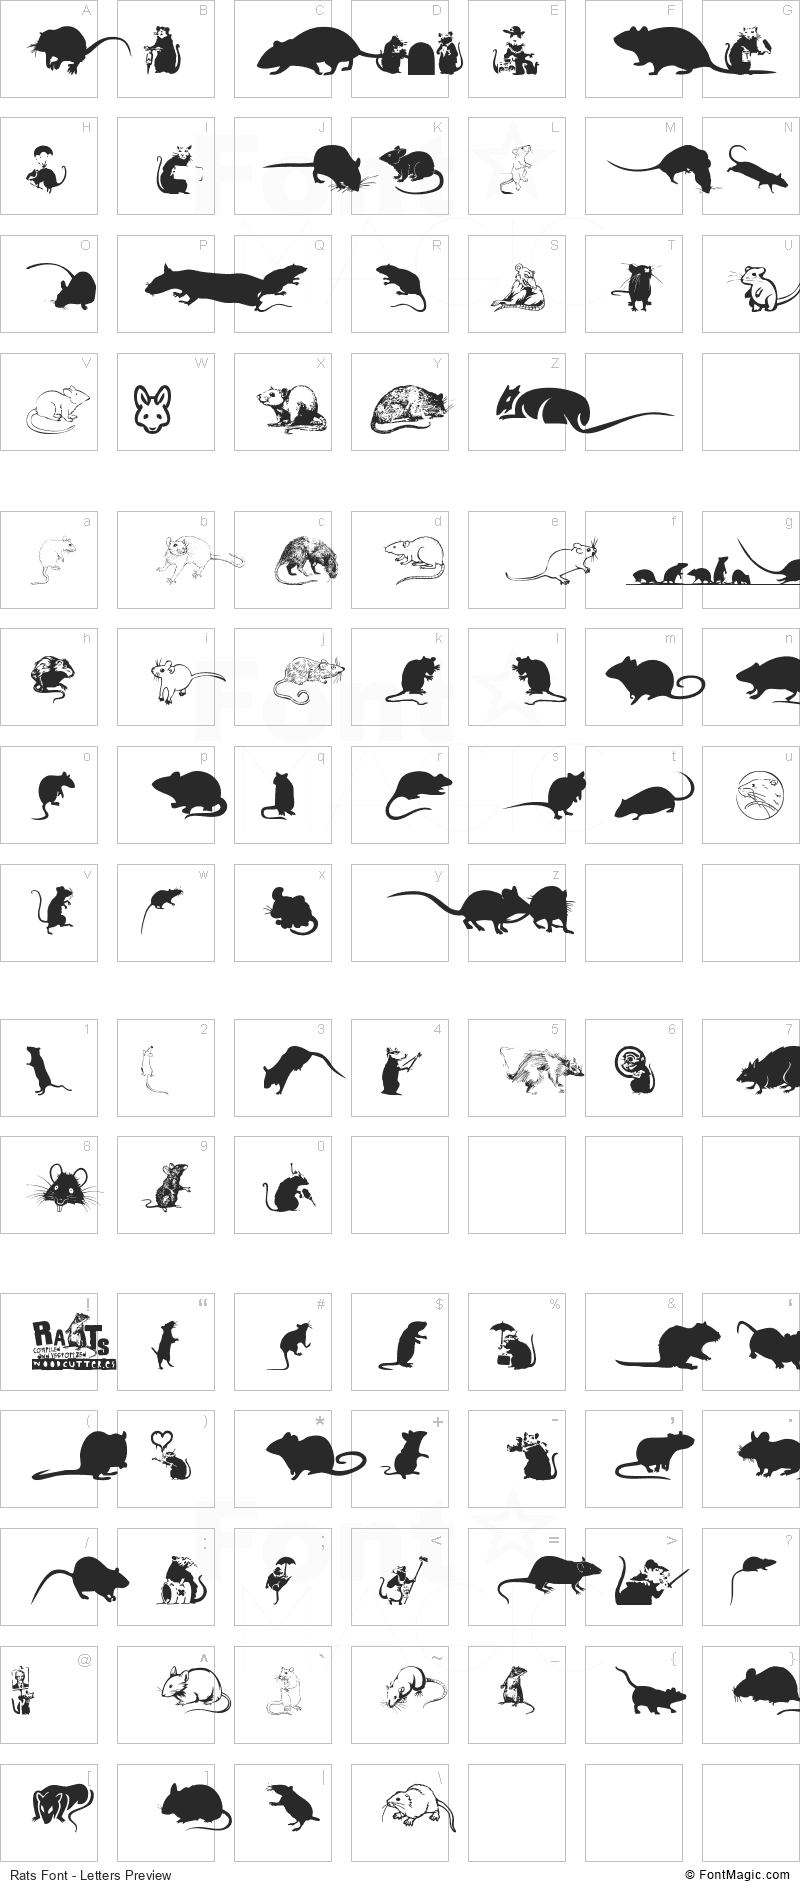 Rats Font - All Latters Preview Chart